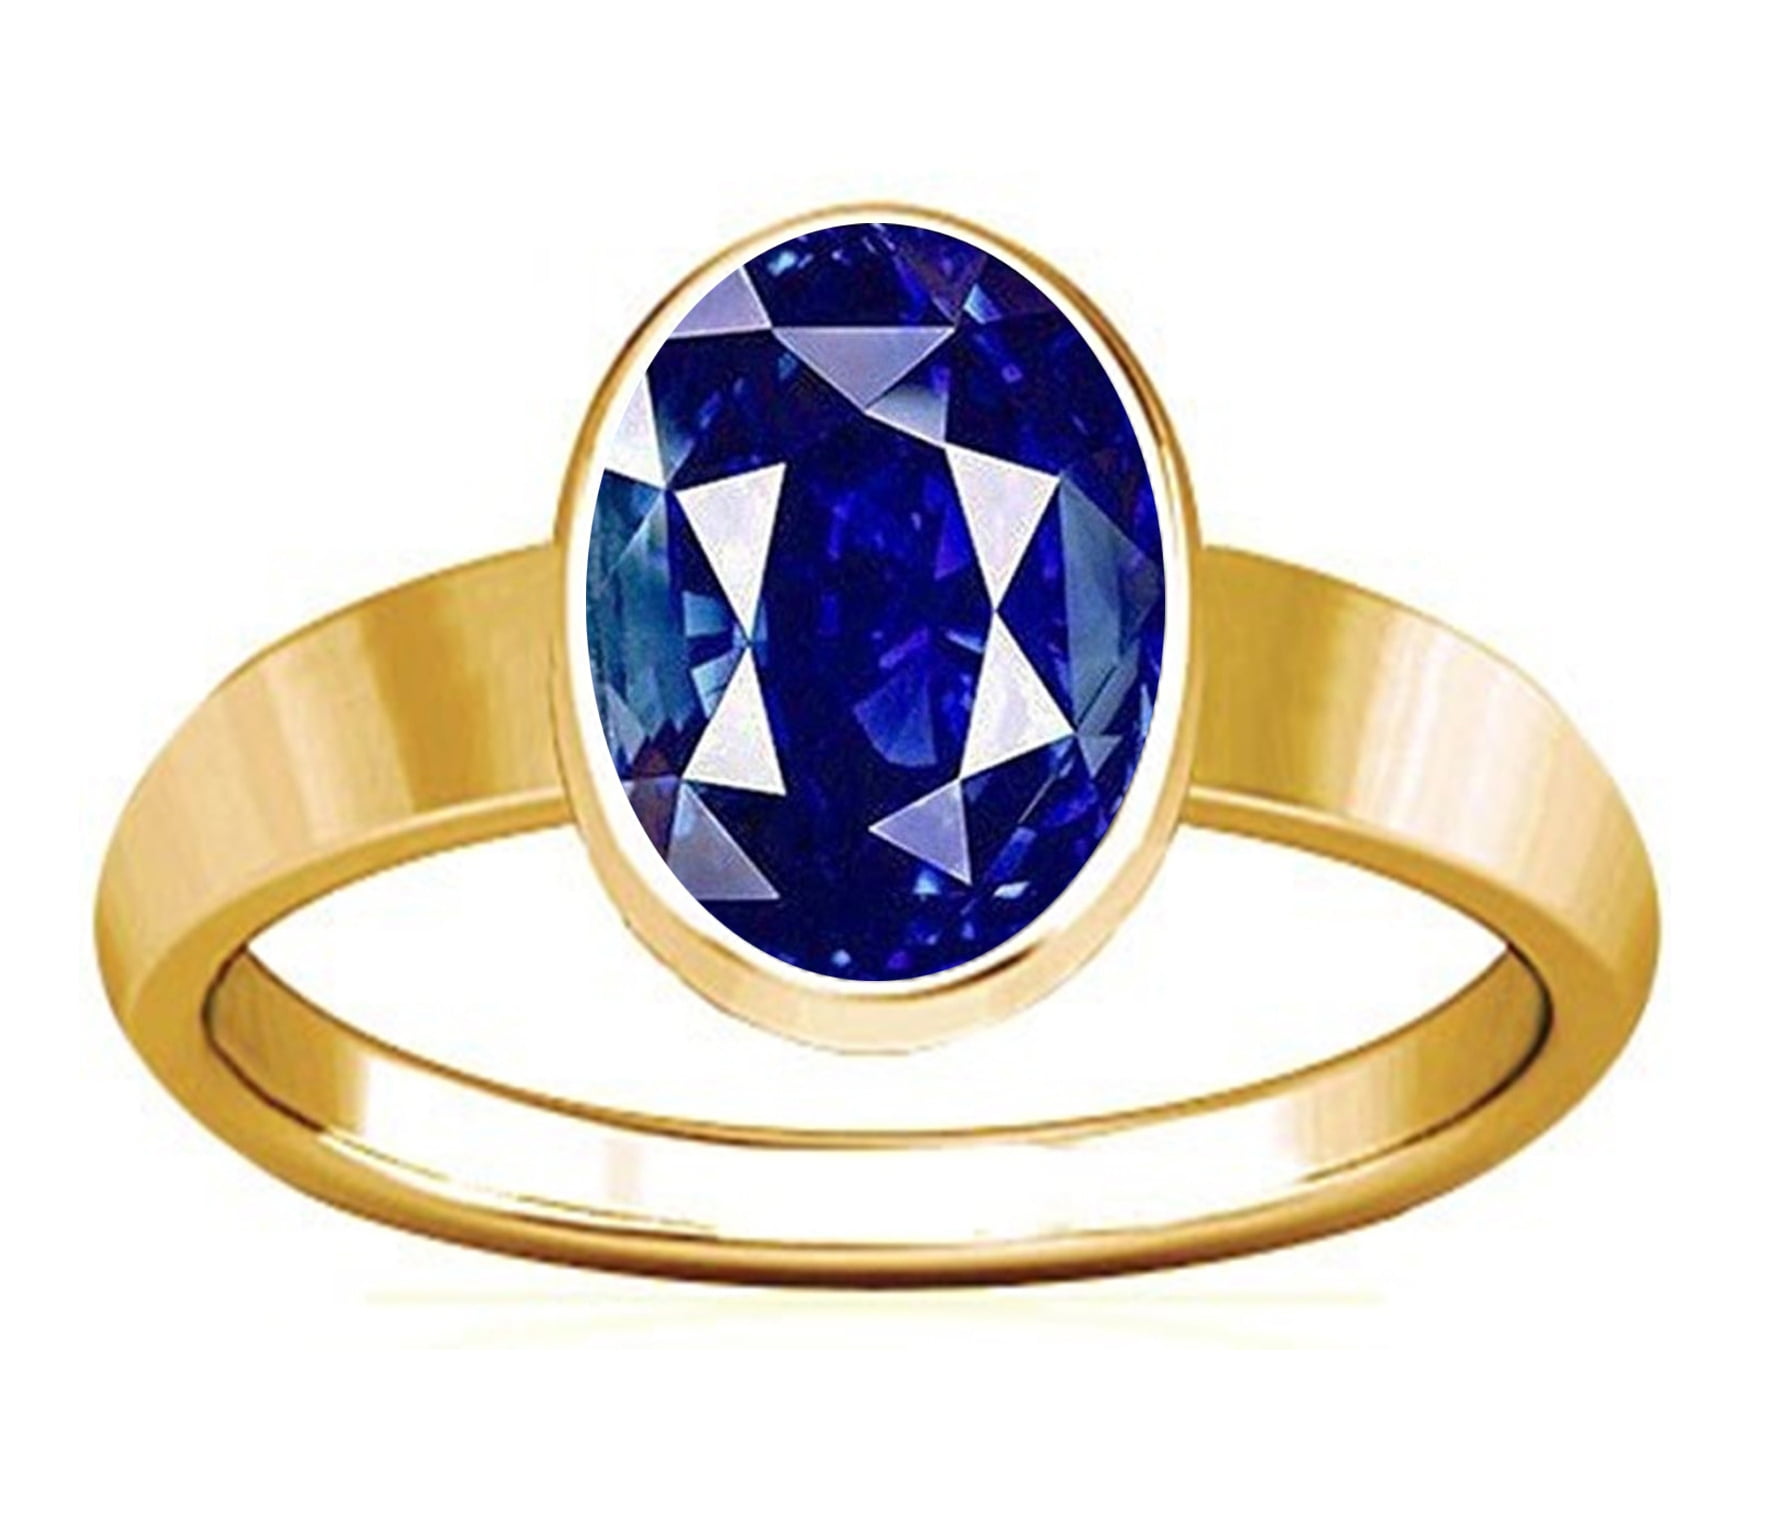 Buy SONIYA GEMS 16.25 Ratti (AA++) Certified Blue Sapphire Ring (Nilam/Neelam  Stone Silver Plated Ring)(Size 20 to 23) for Men and Woman at Amazon.in